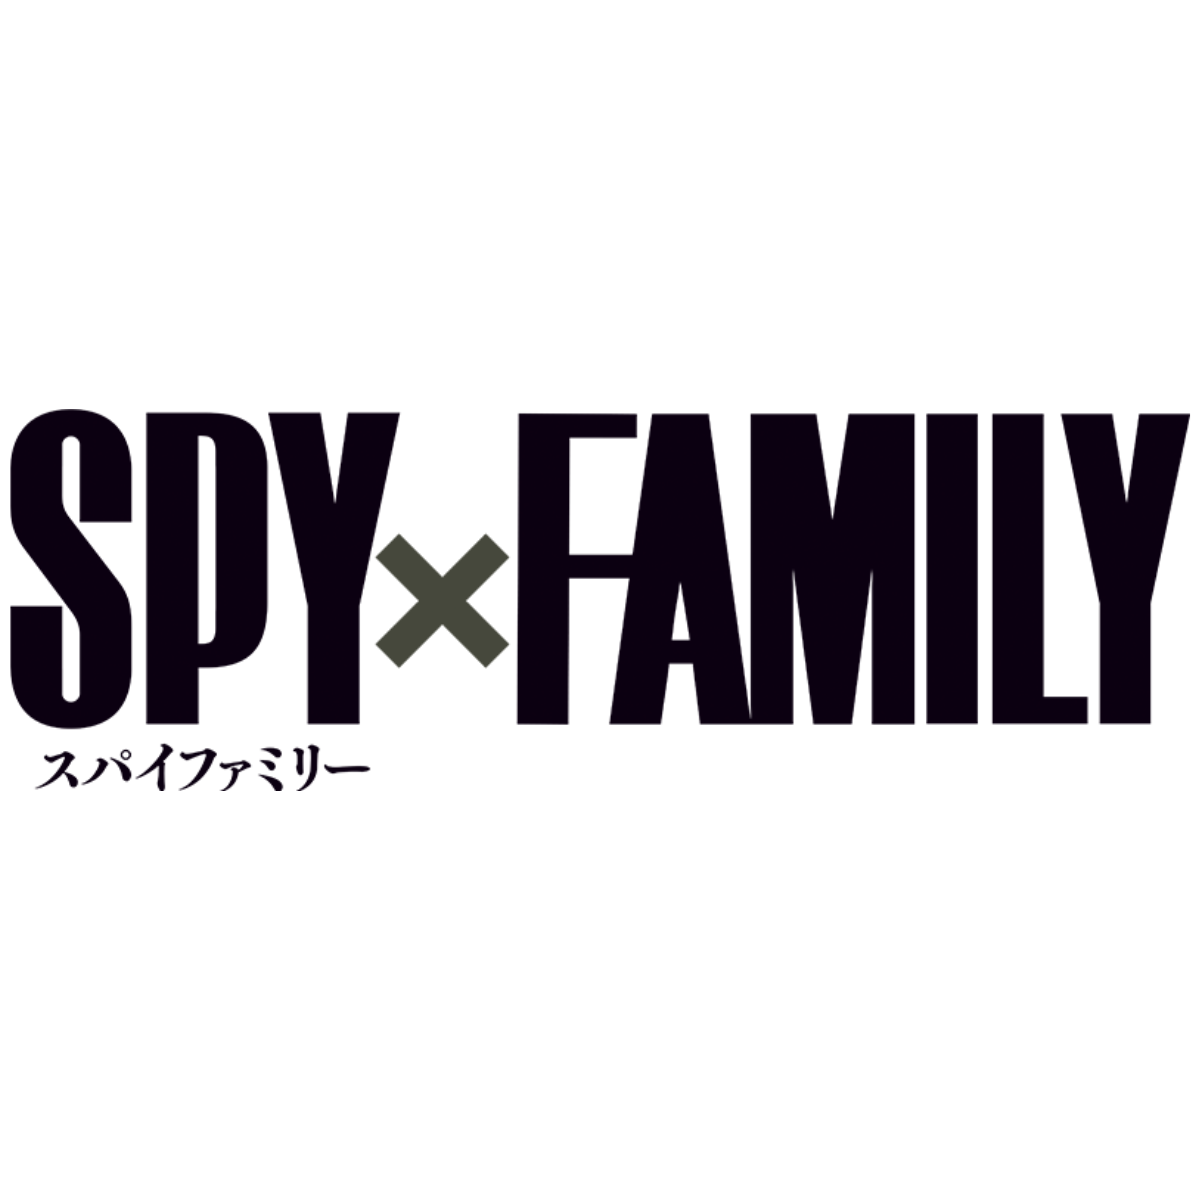 Movic x Spy x Family Chara Sleeve Collection Matte Series - [MT1515] "Key Visual"-Movic-Ace Cards & Collectibles